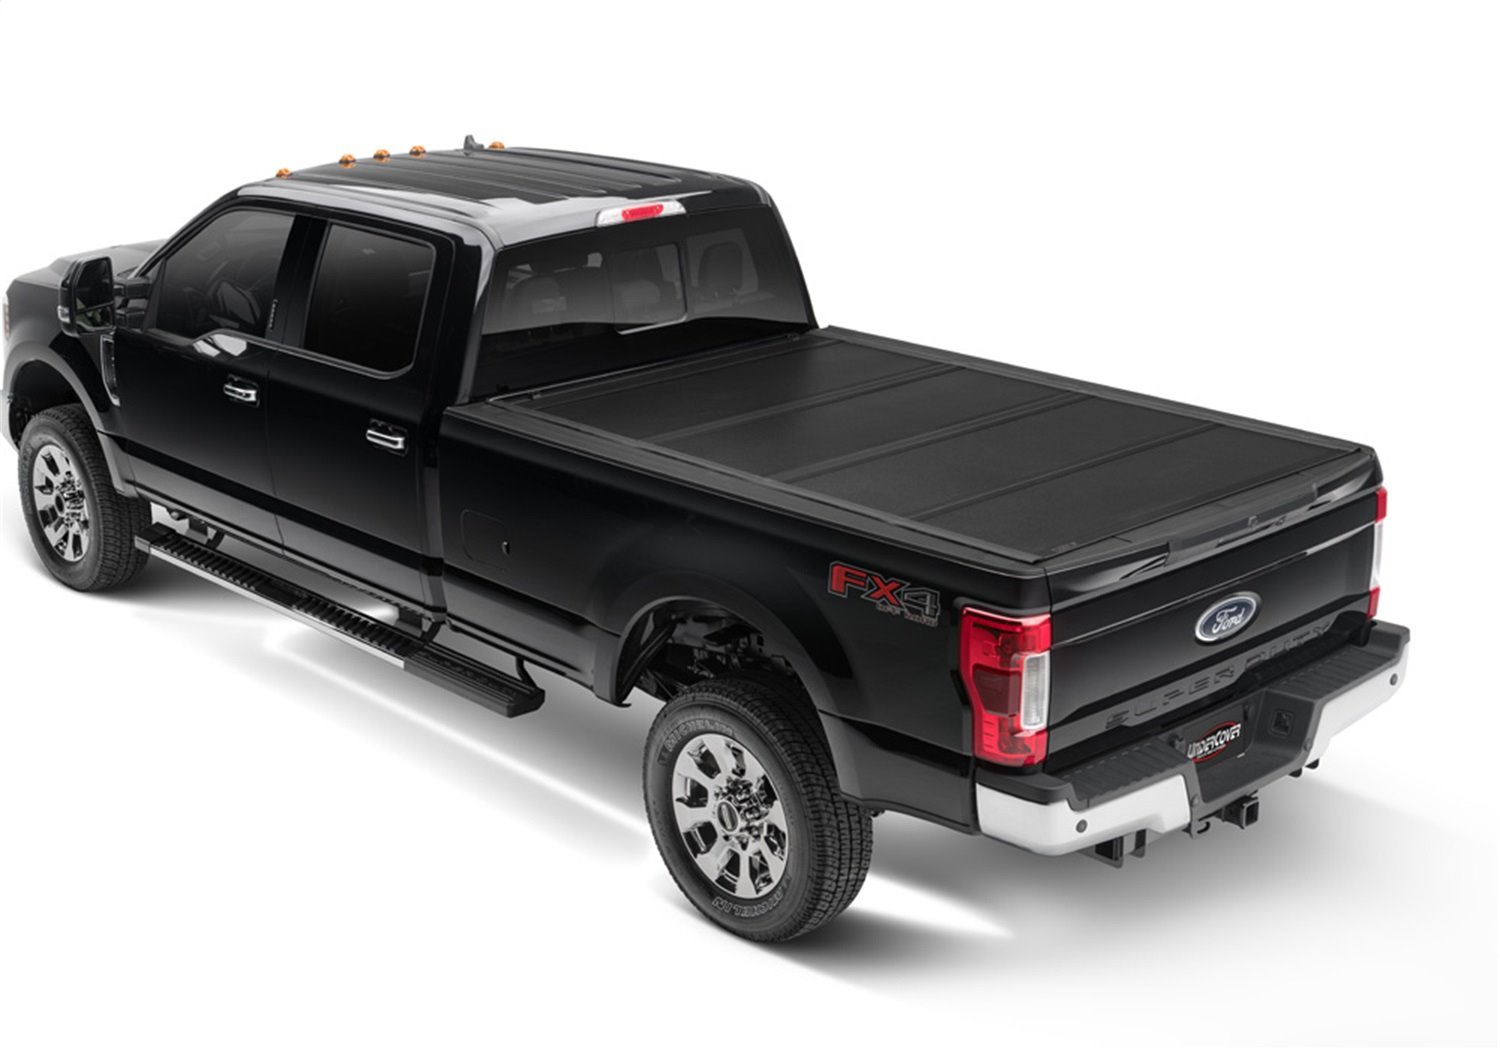 AX22021 Armor Flex Hard Folding Cover, Fits Select Ford F-250/350 6'10" Bed STD/EXT/Crew, Black Textured